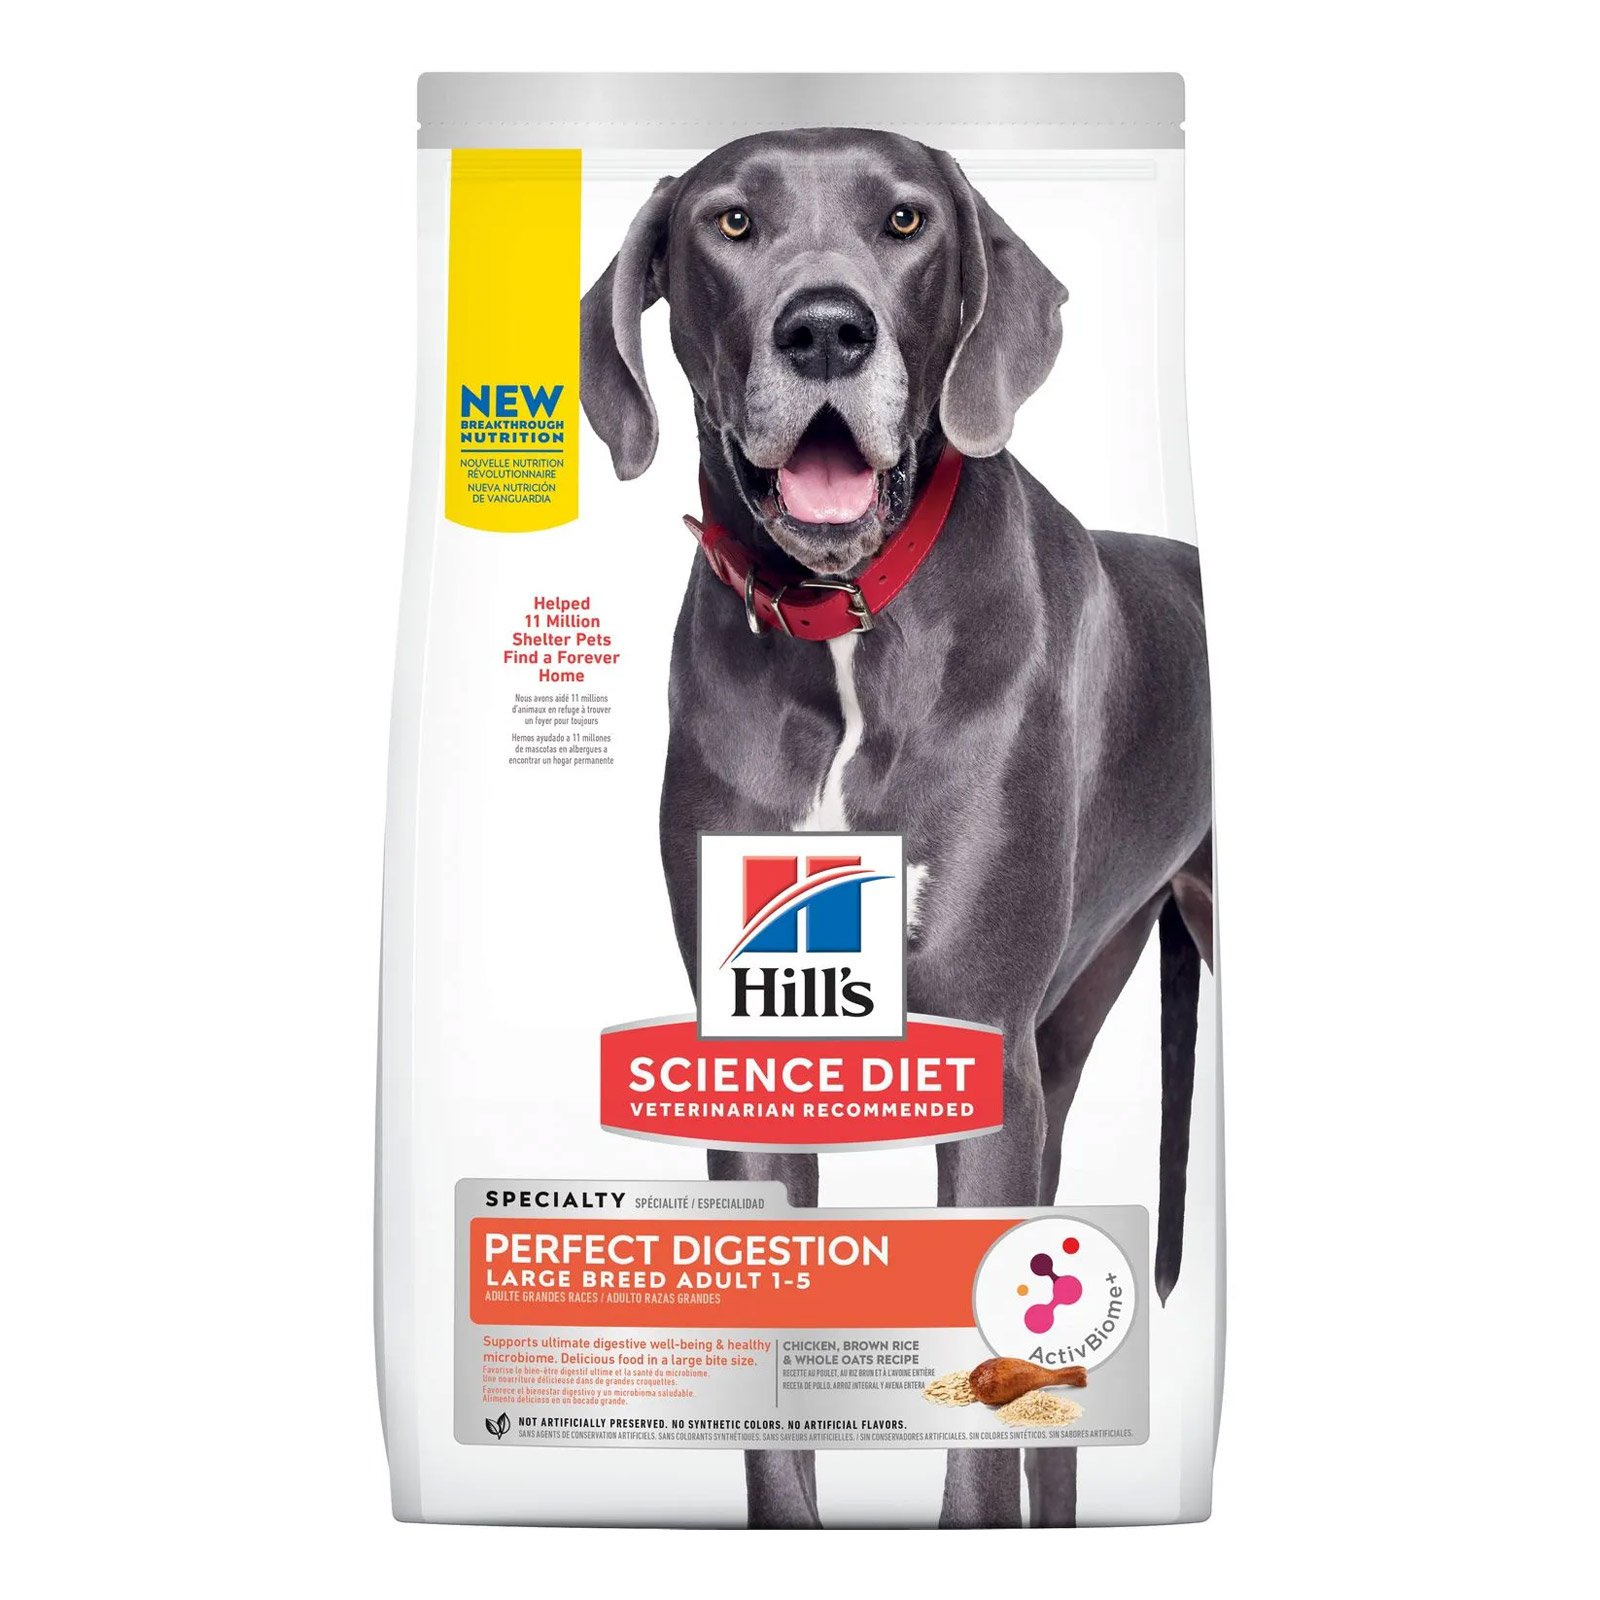 Hill's Science Diet Perfect Digestion Large Breed Dog Food 5.44 Kg